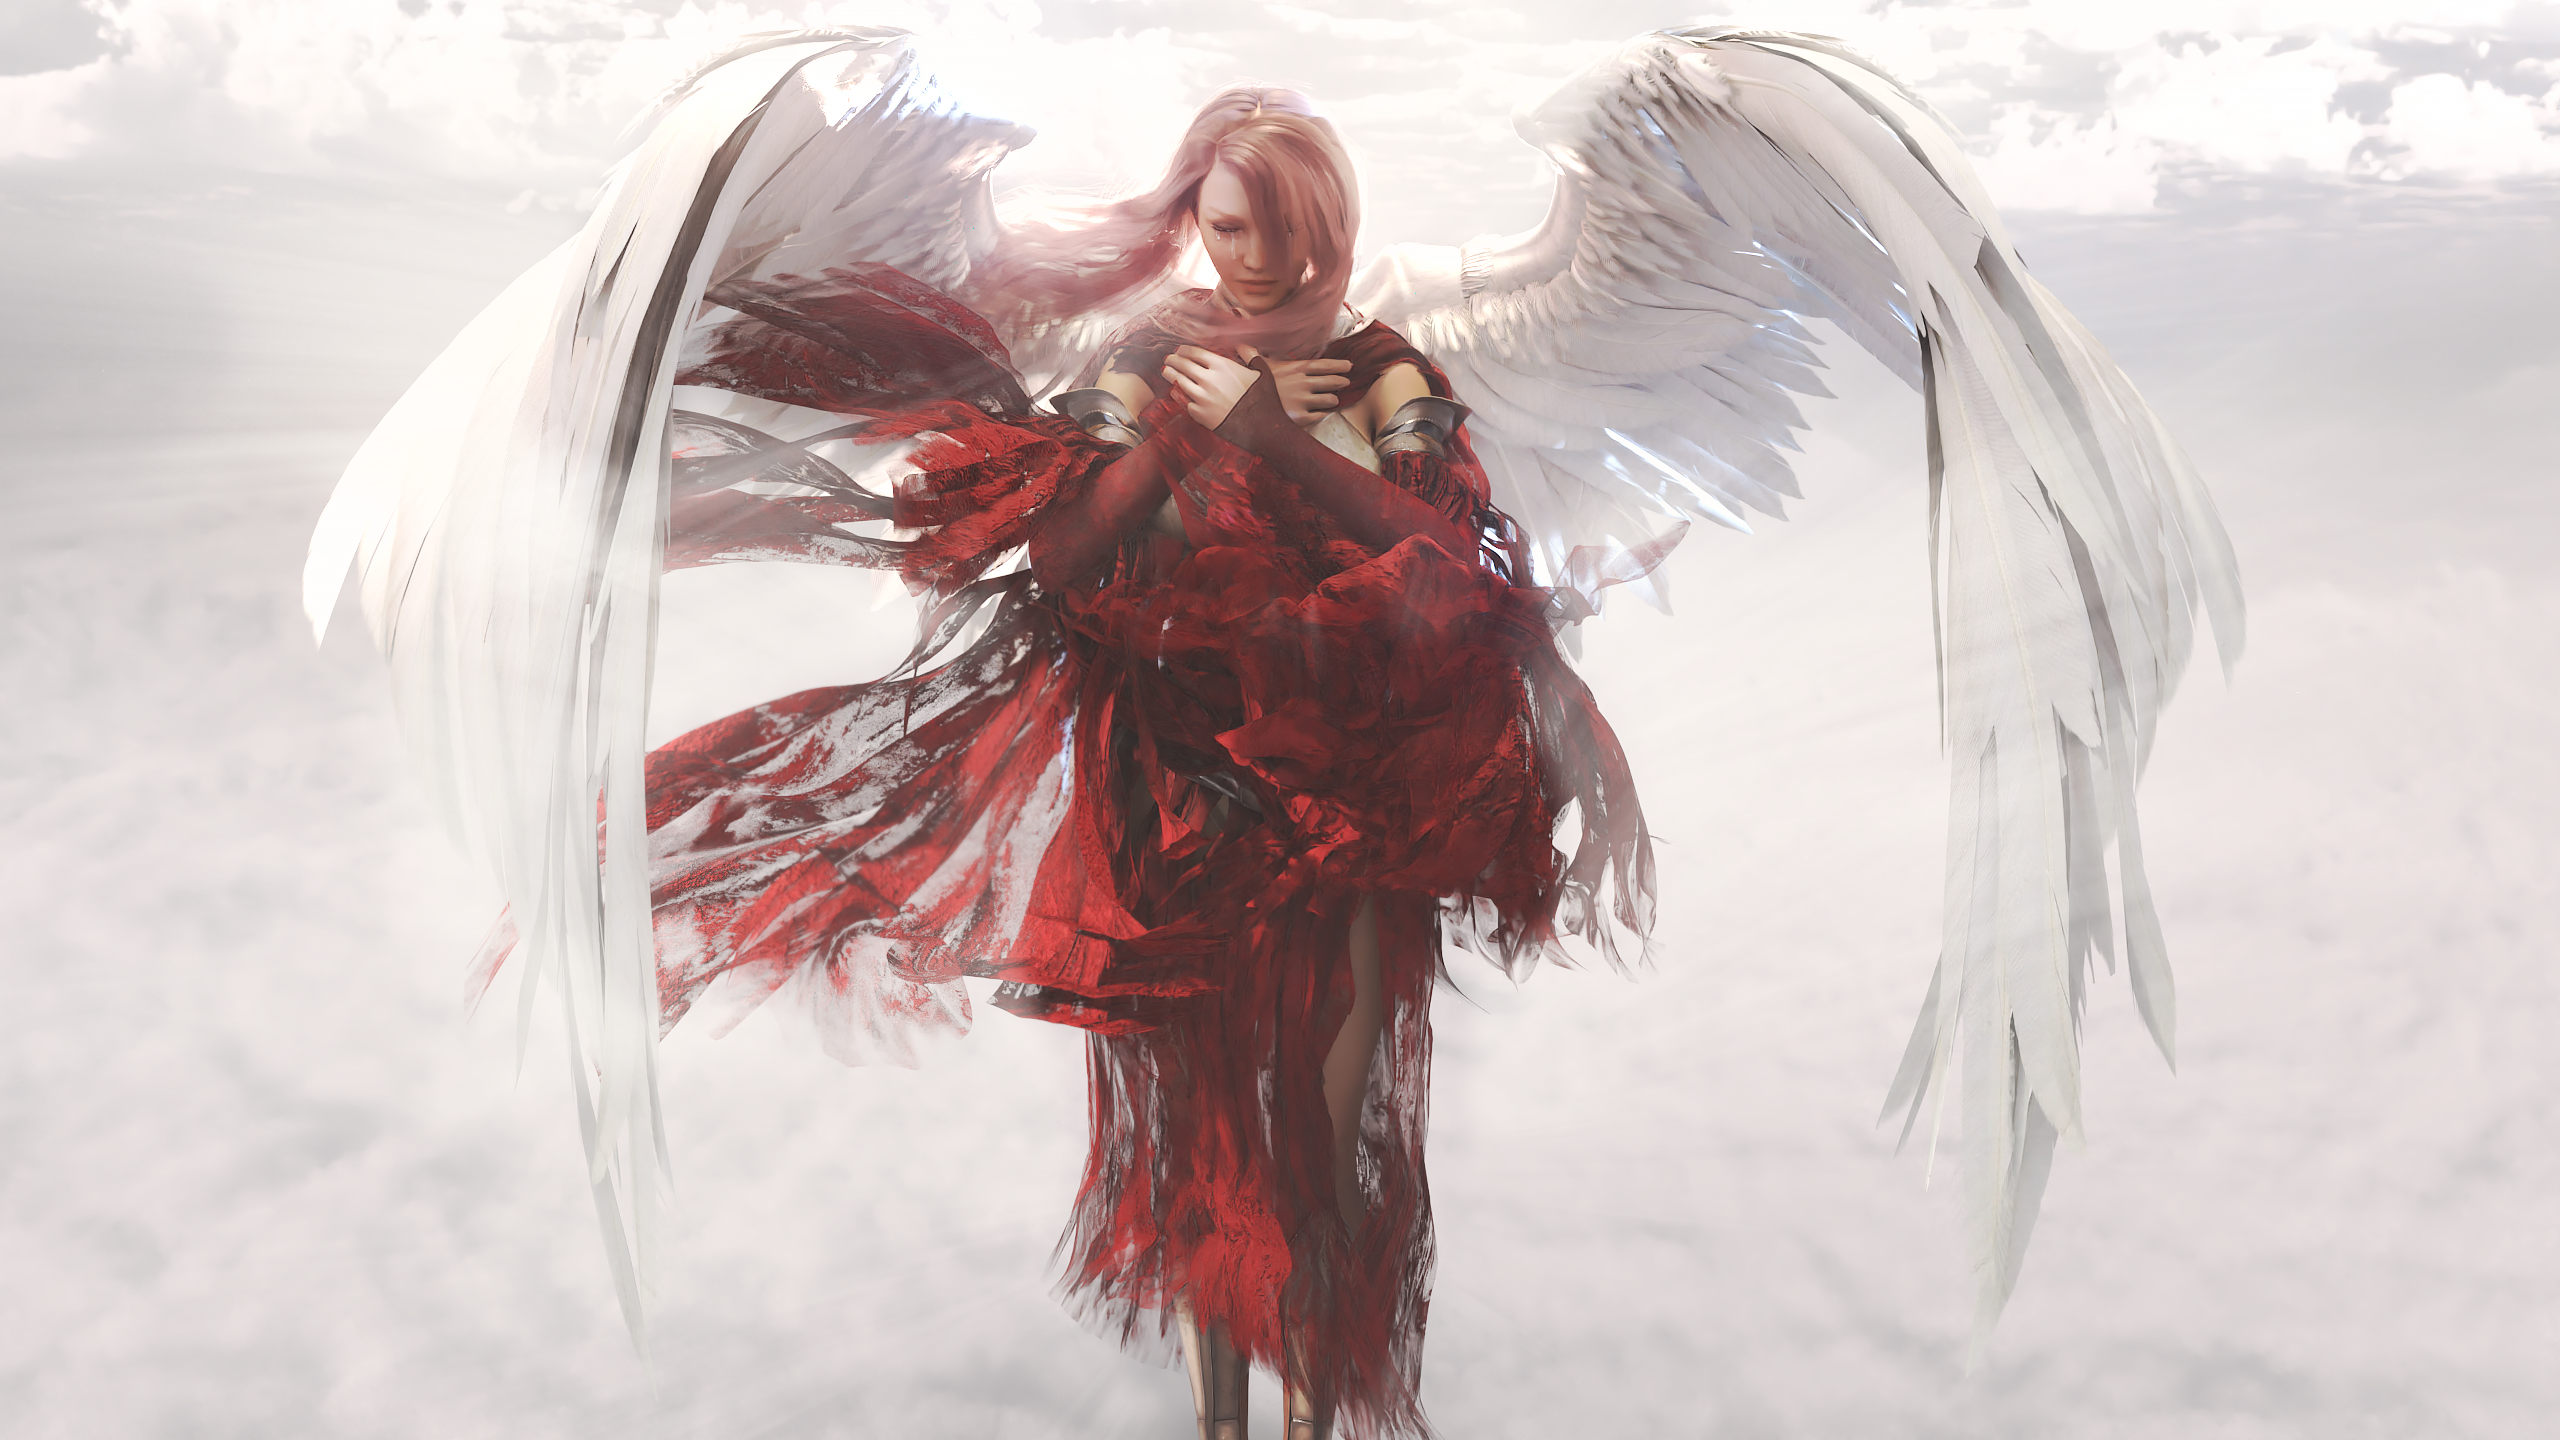 General 2560x1440 The Deluca Family adult games CGI crying woman crying red clothing pink hair clouds angel wings